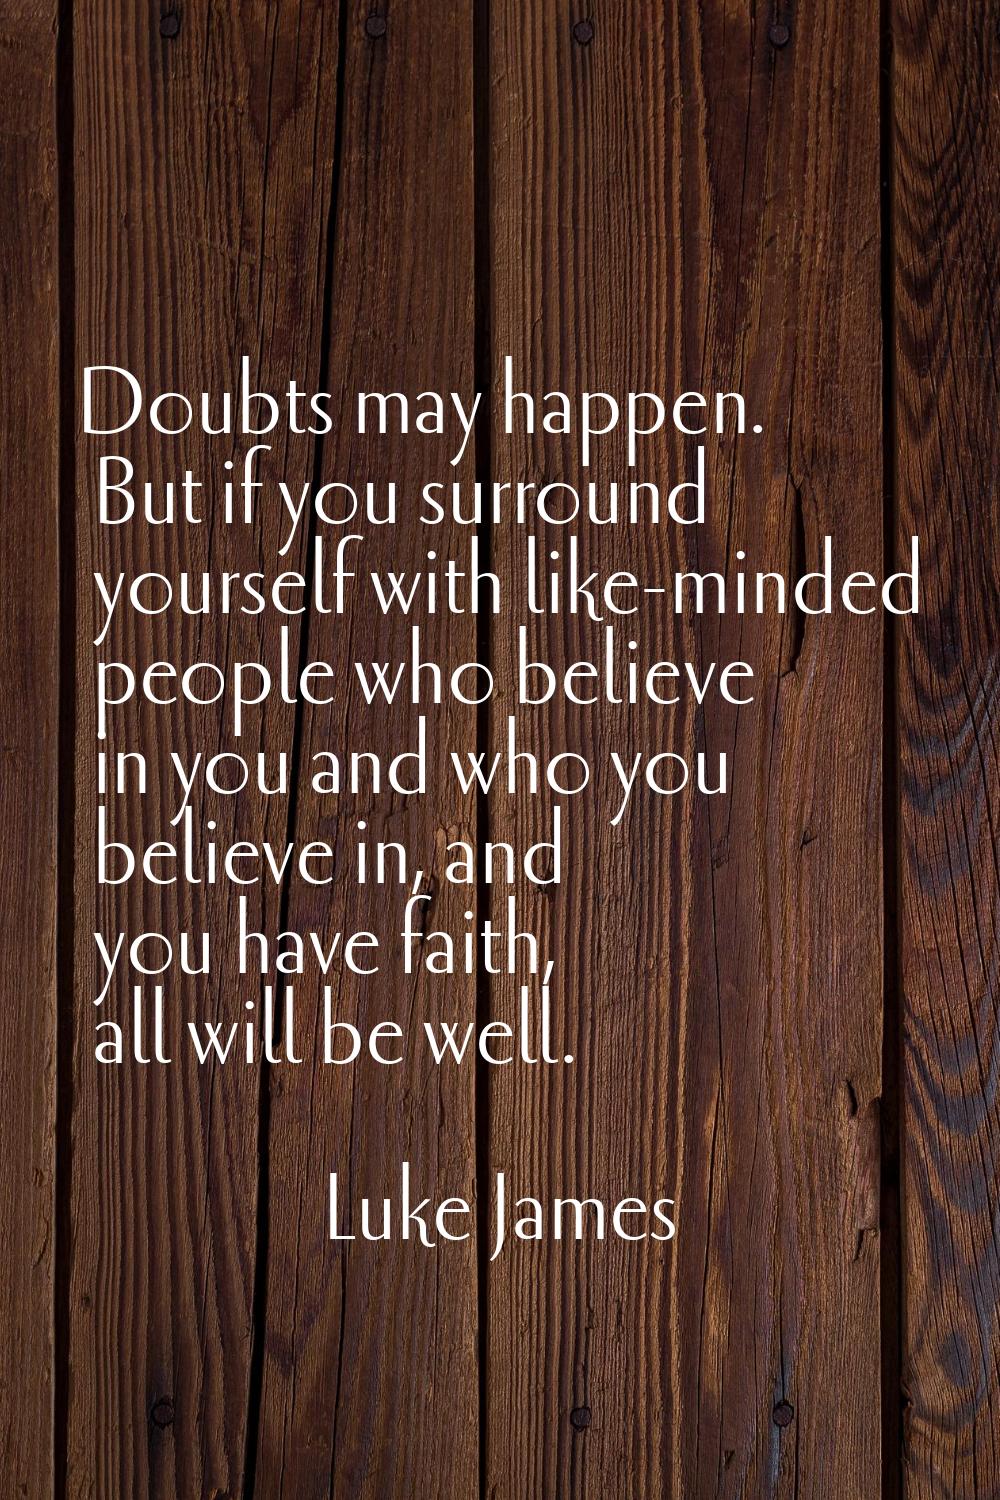 Doubts may happen. But if you surround yourself with like-minded people who believe in you and who 